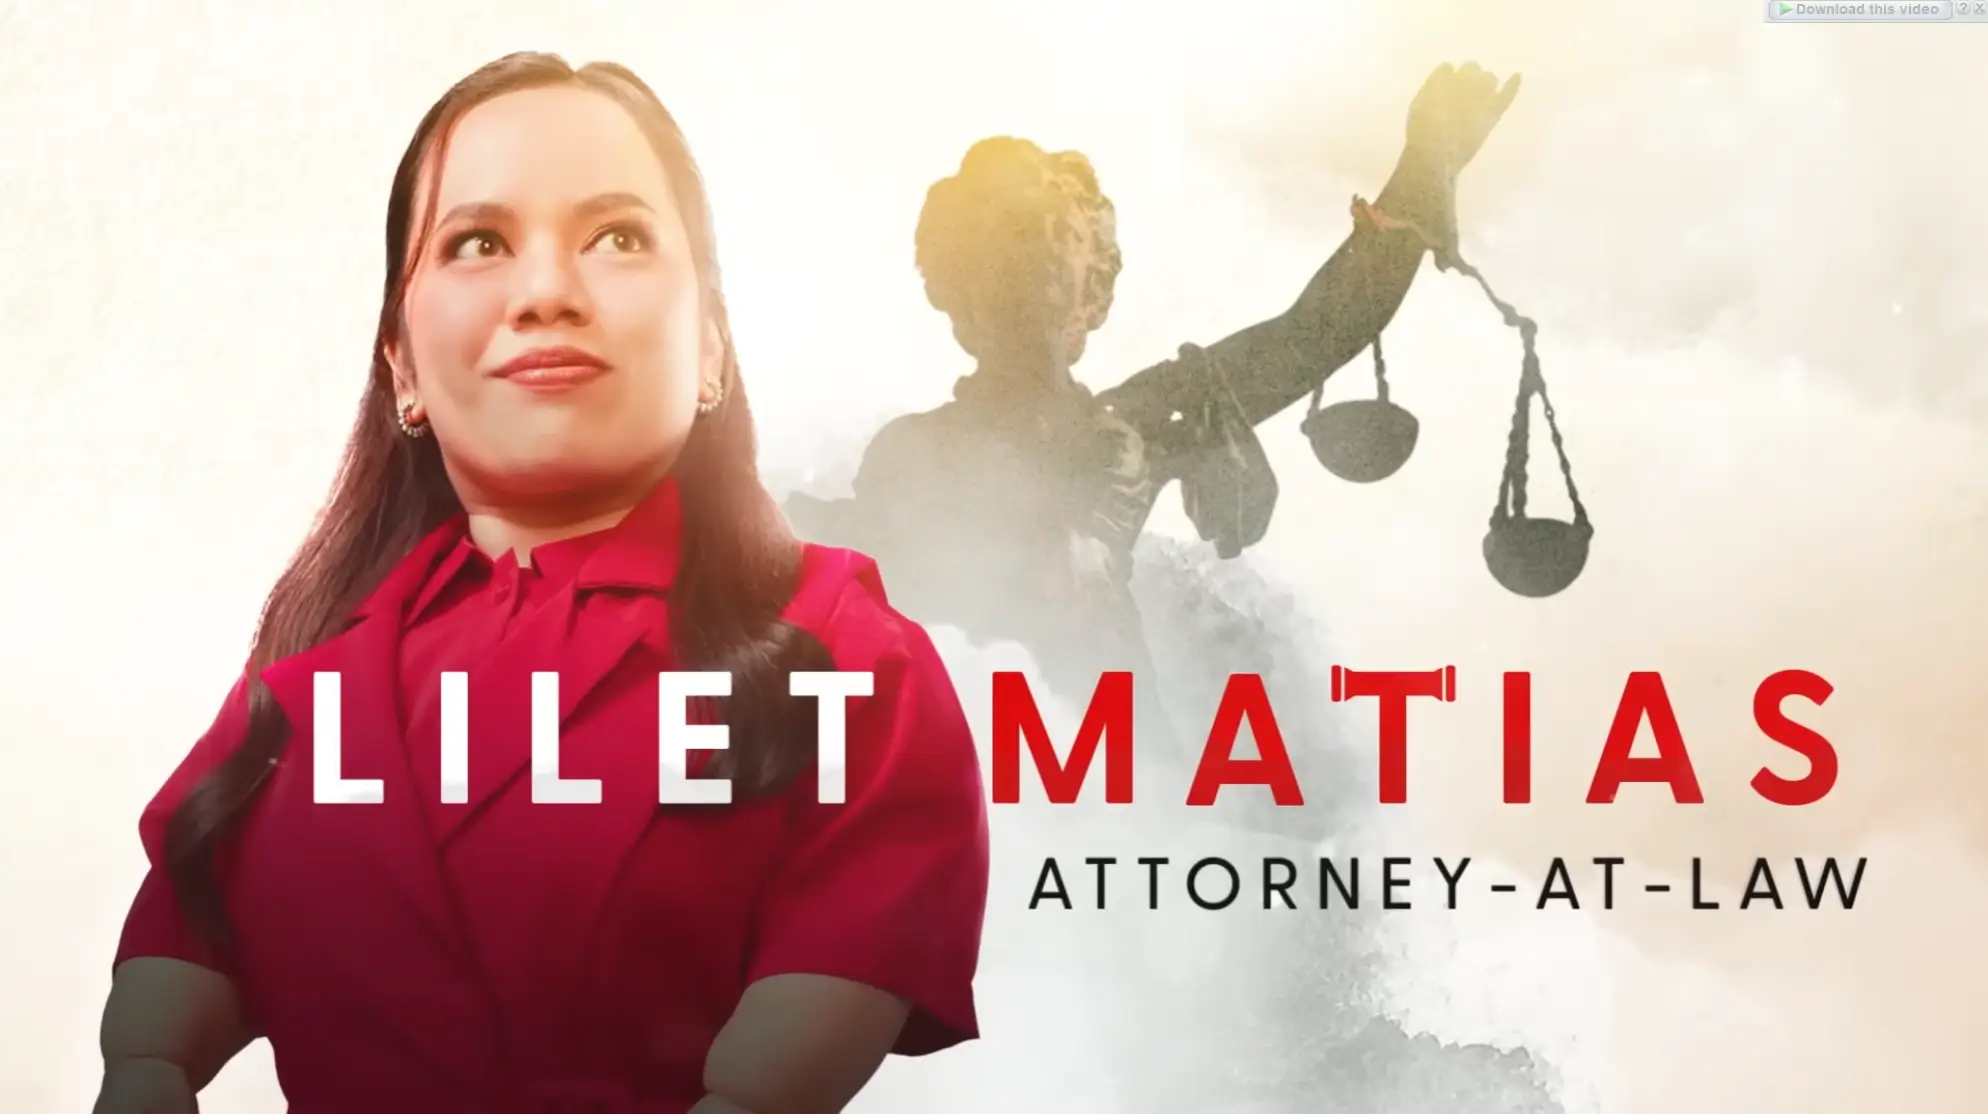 Lilet-Matias-Attorney-at-Law